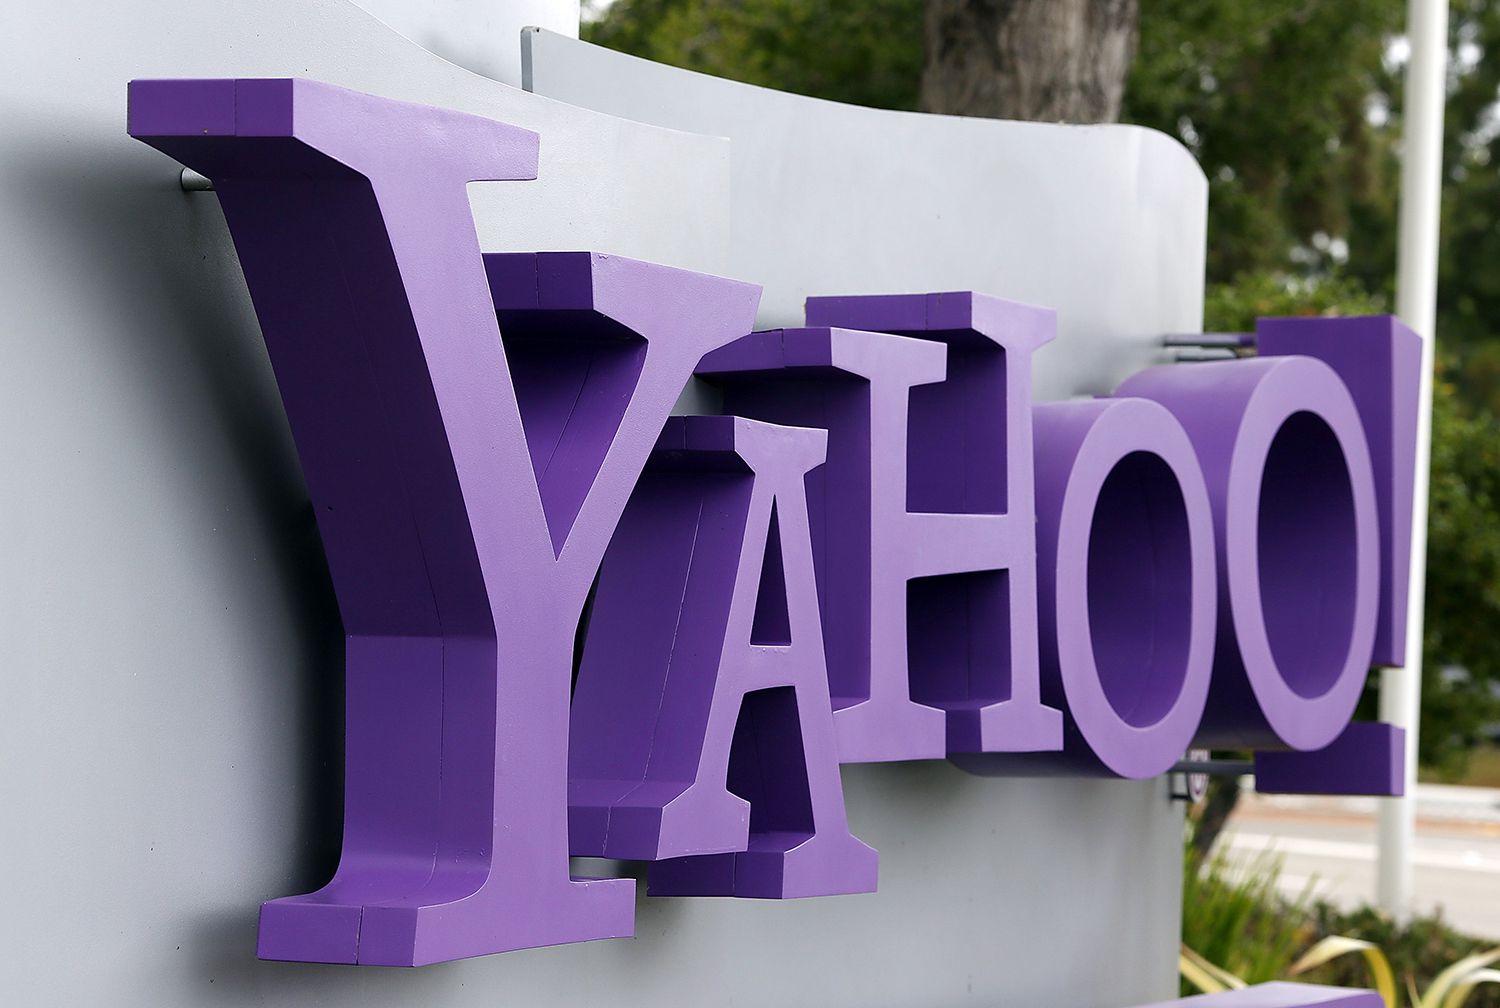 Yahoo unveils an AI email assistant (and it works with Gmail)